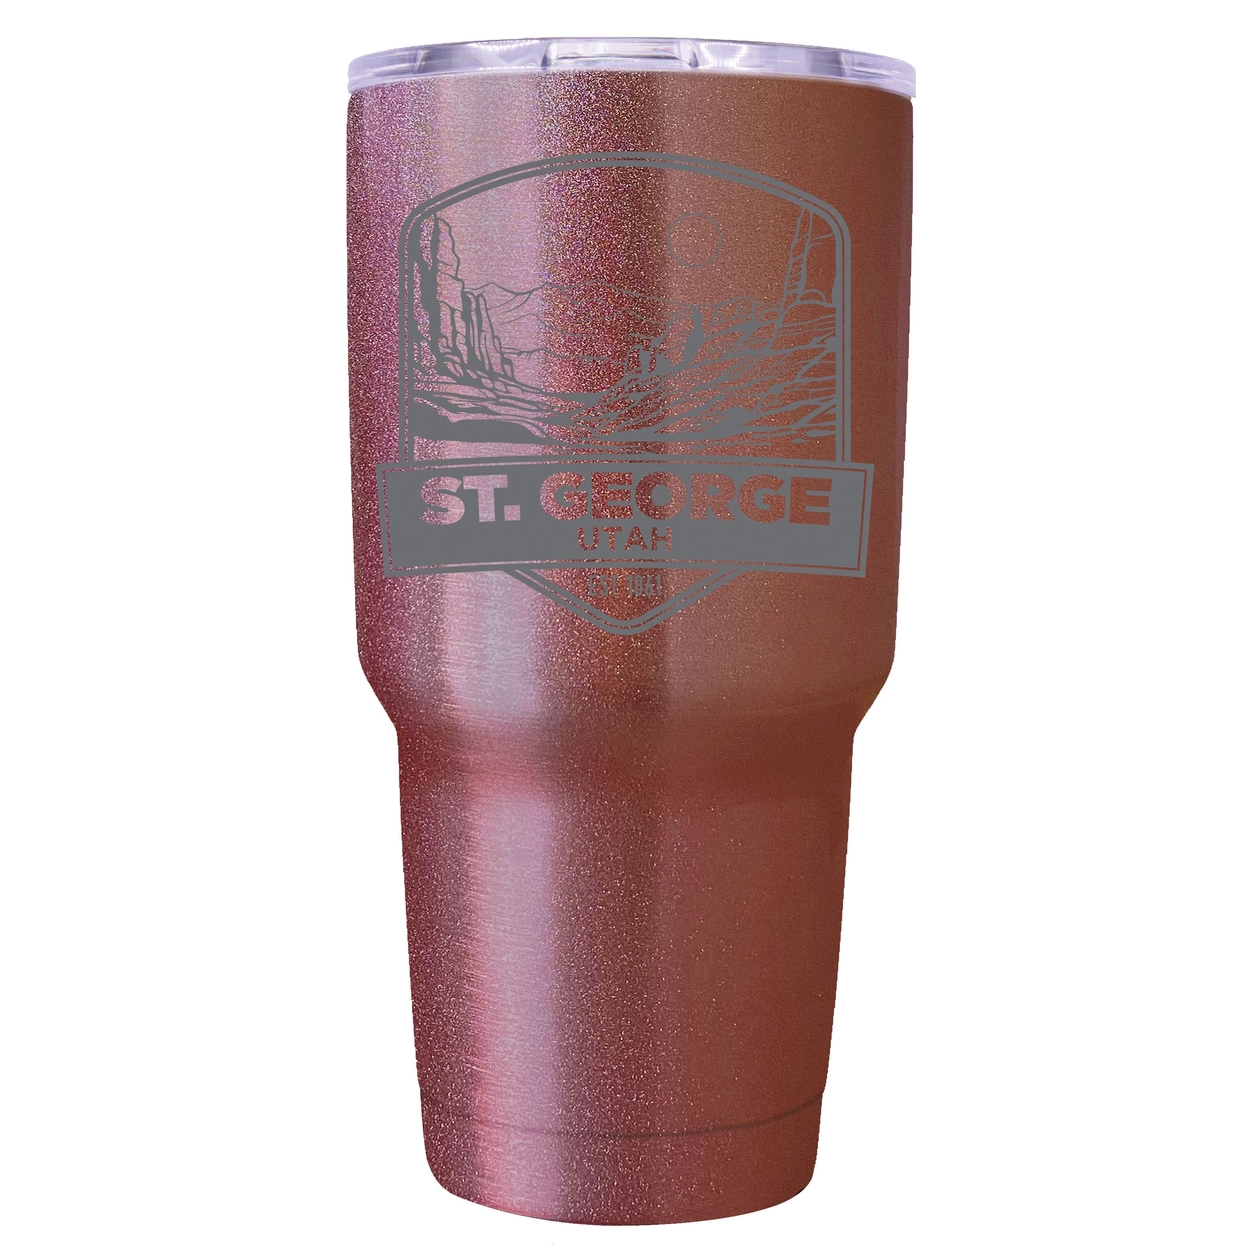 St. George Utah Souvenir 24 Oz Engraved Insulated Stainless Steel Tumbler - White,,4-Pack